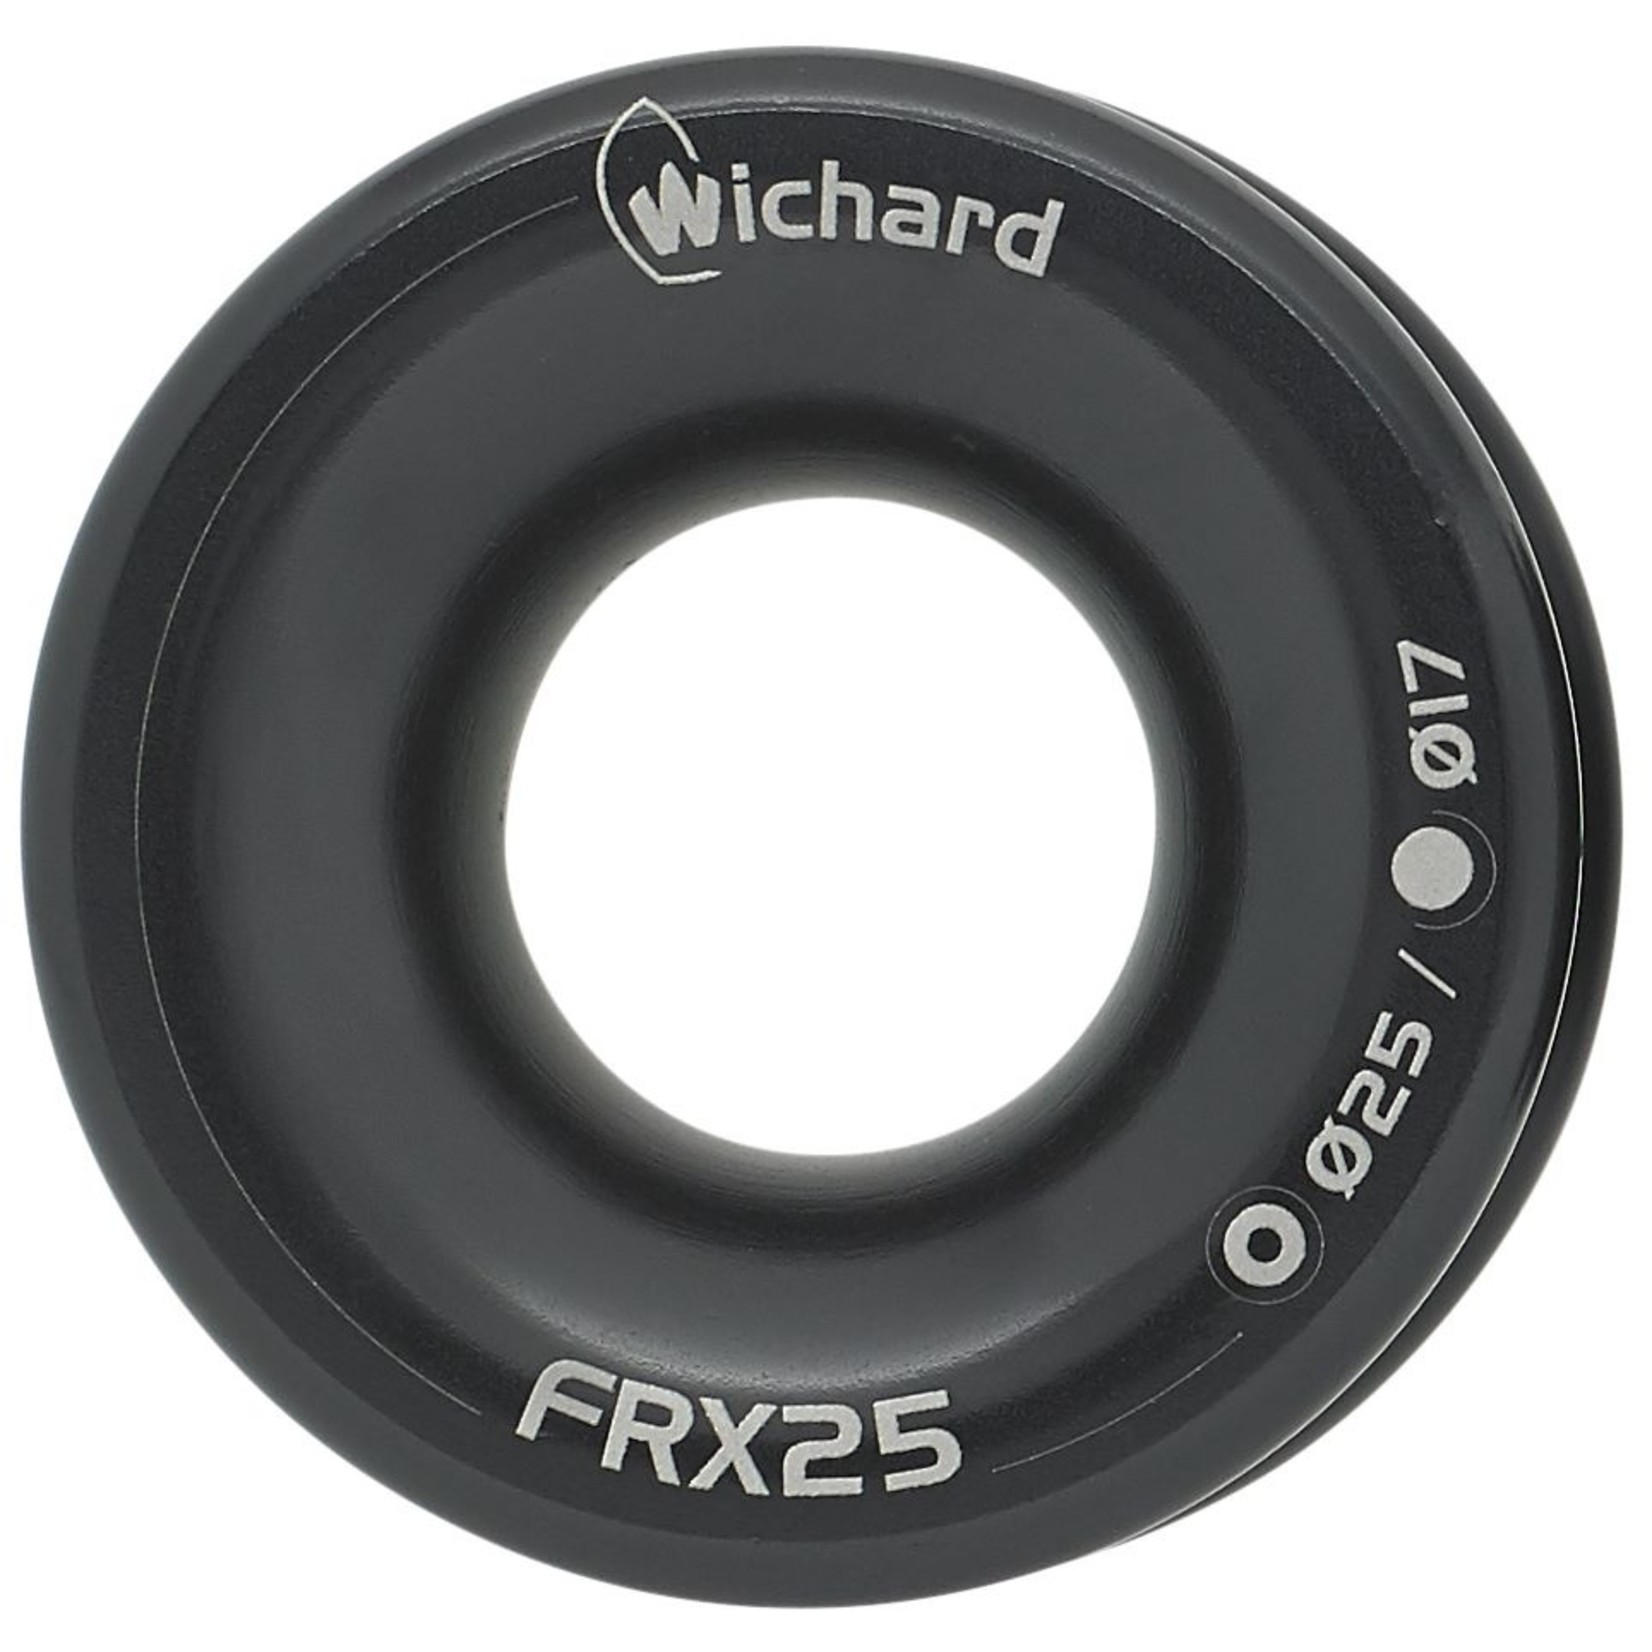 Wichard FRX25 - Friction ring